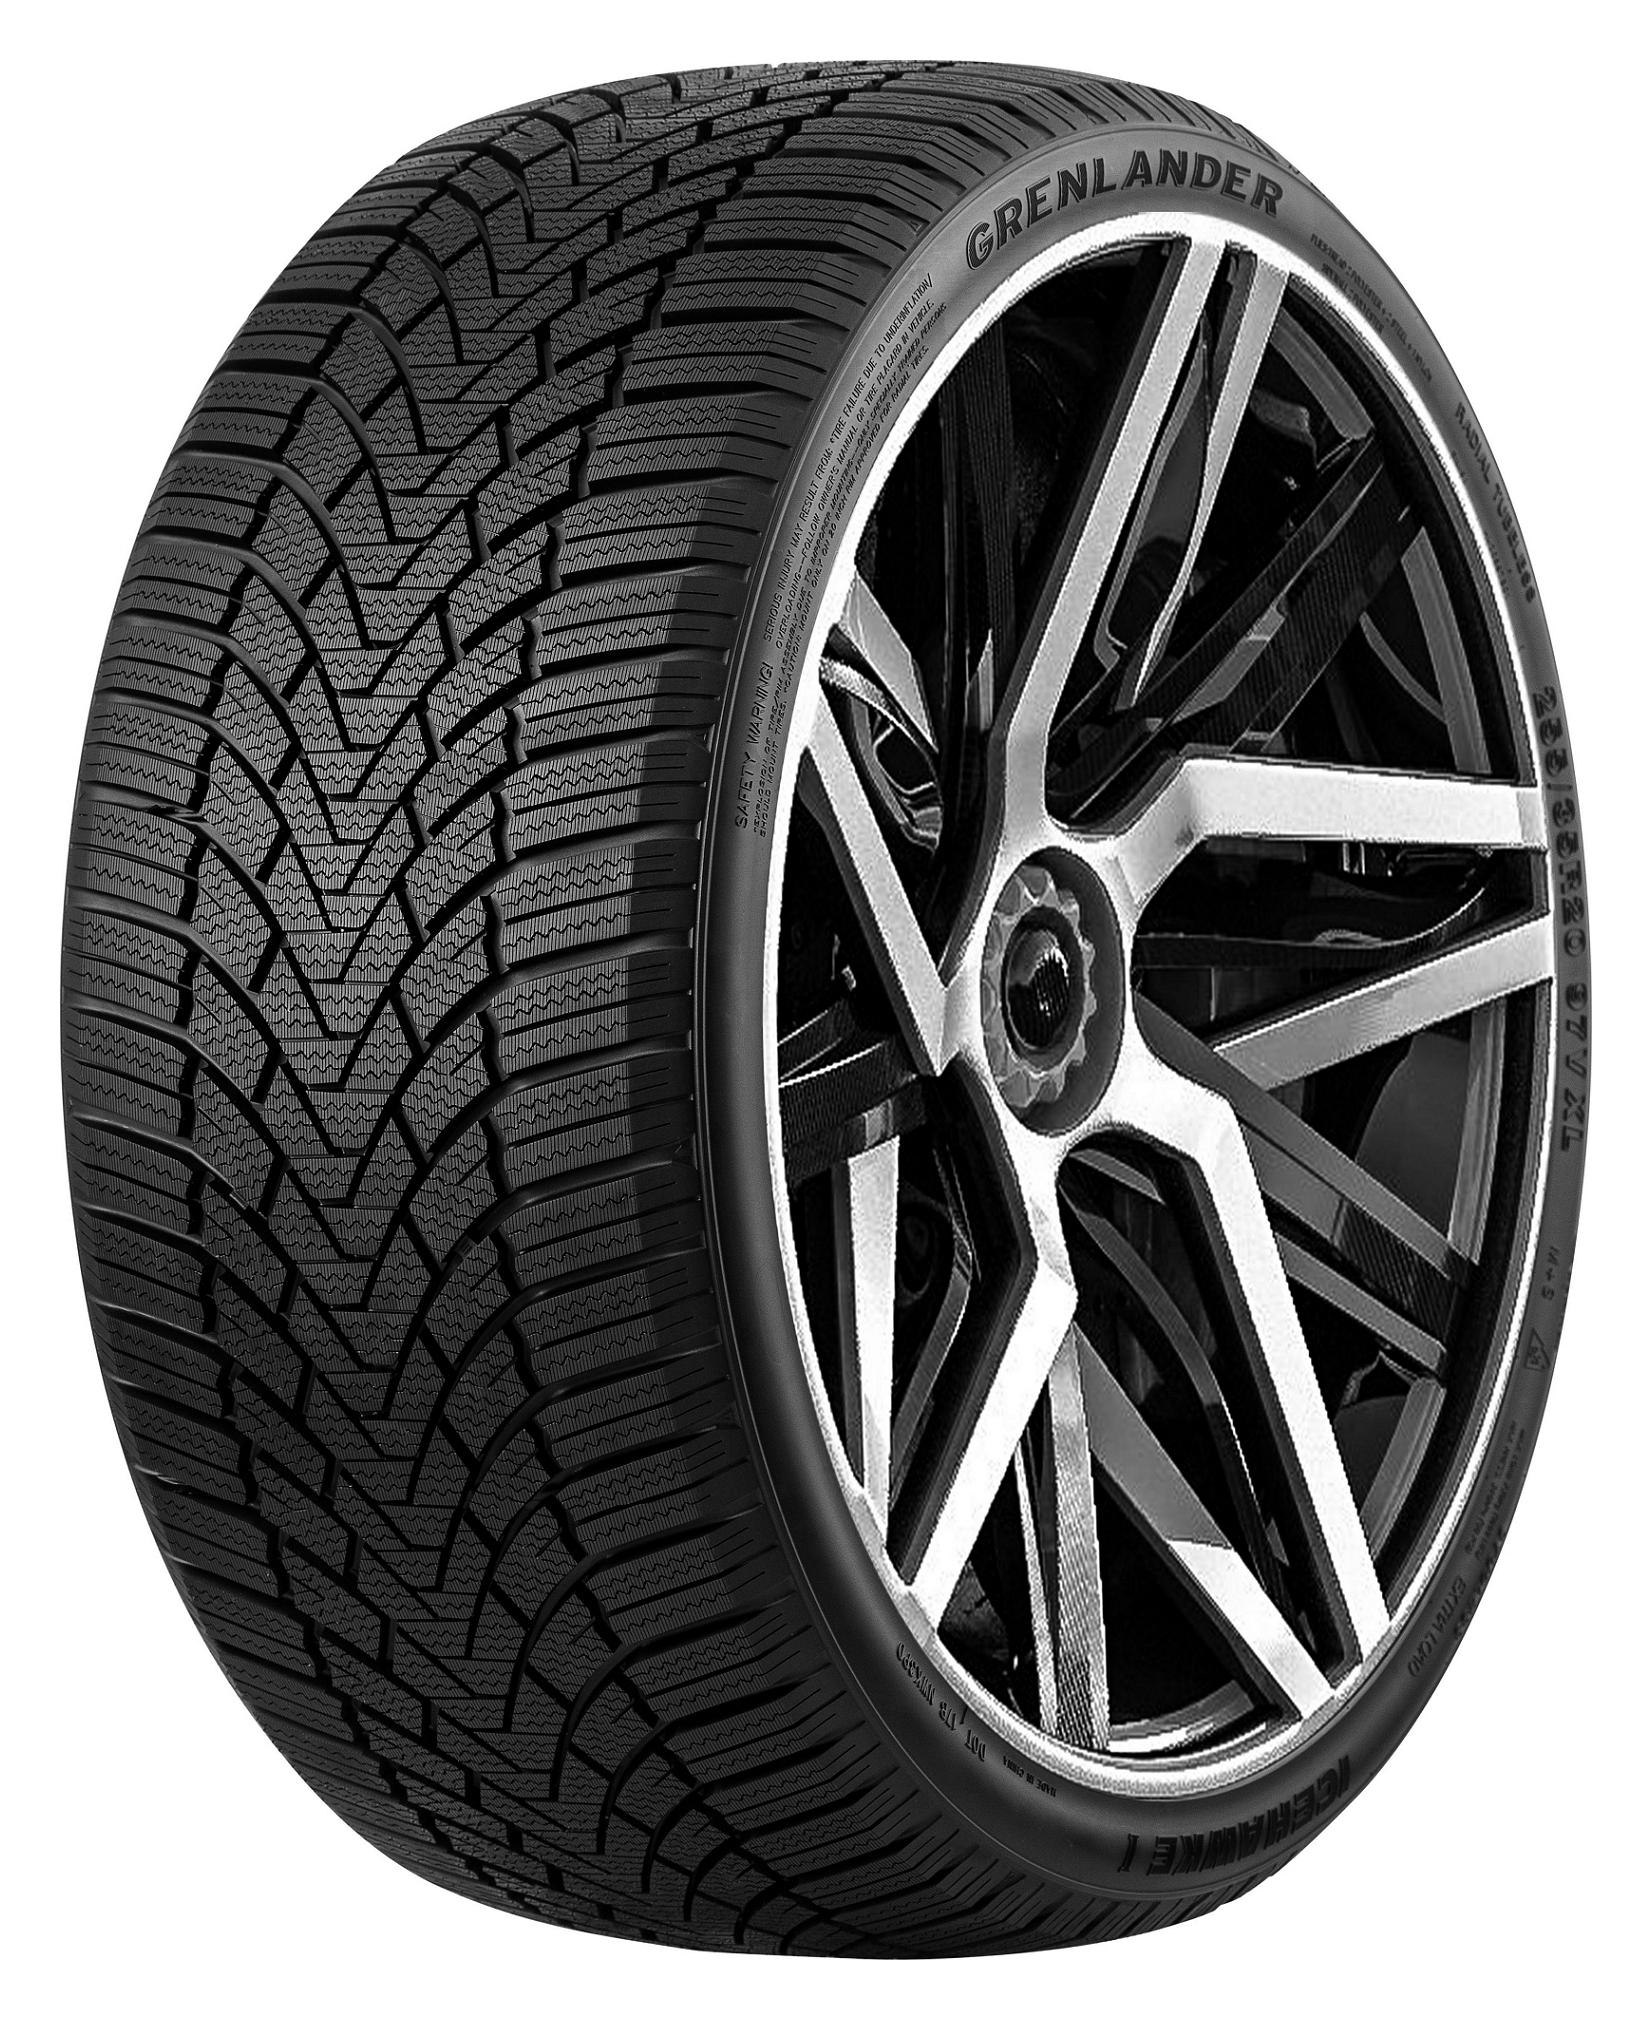 Thumb Grenlander Gomme Nuove Grenlander 235/55 R17 103H Icehawke1 XL M+S pneumatici nuovi Invernale 0